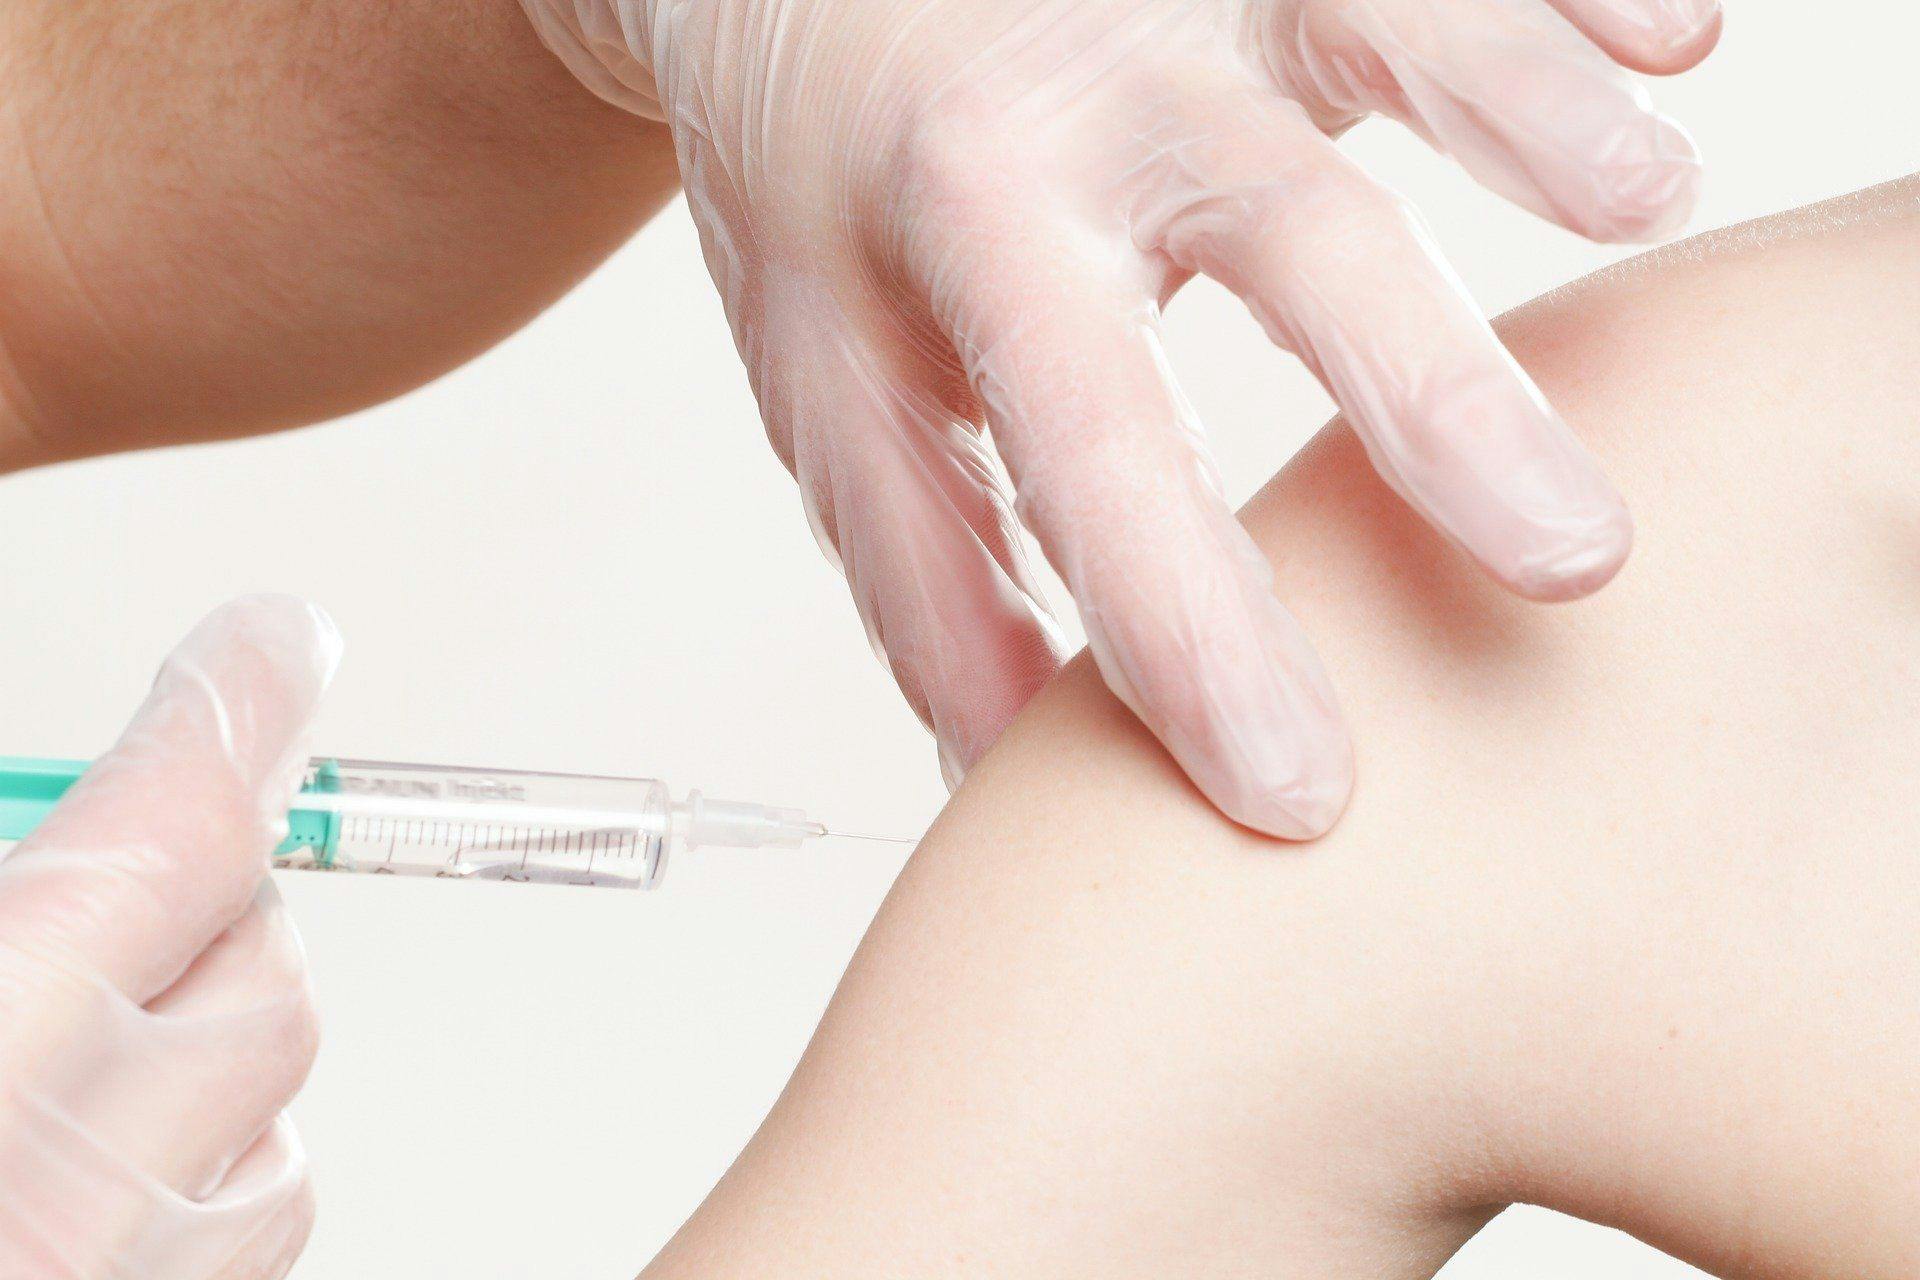 American Cancer Society offers updated guidelines for HPV vaccination